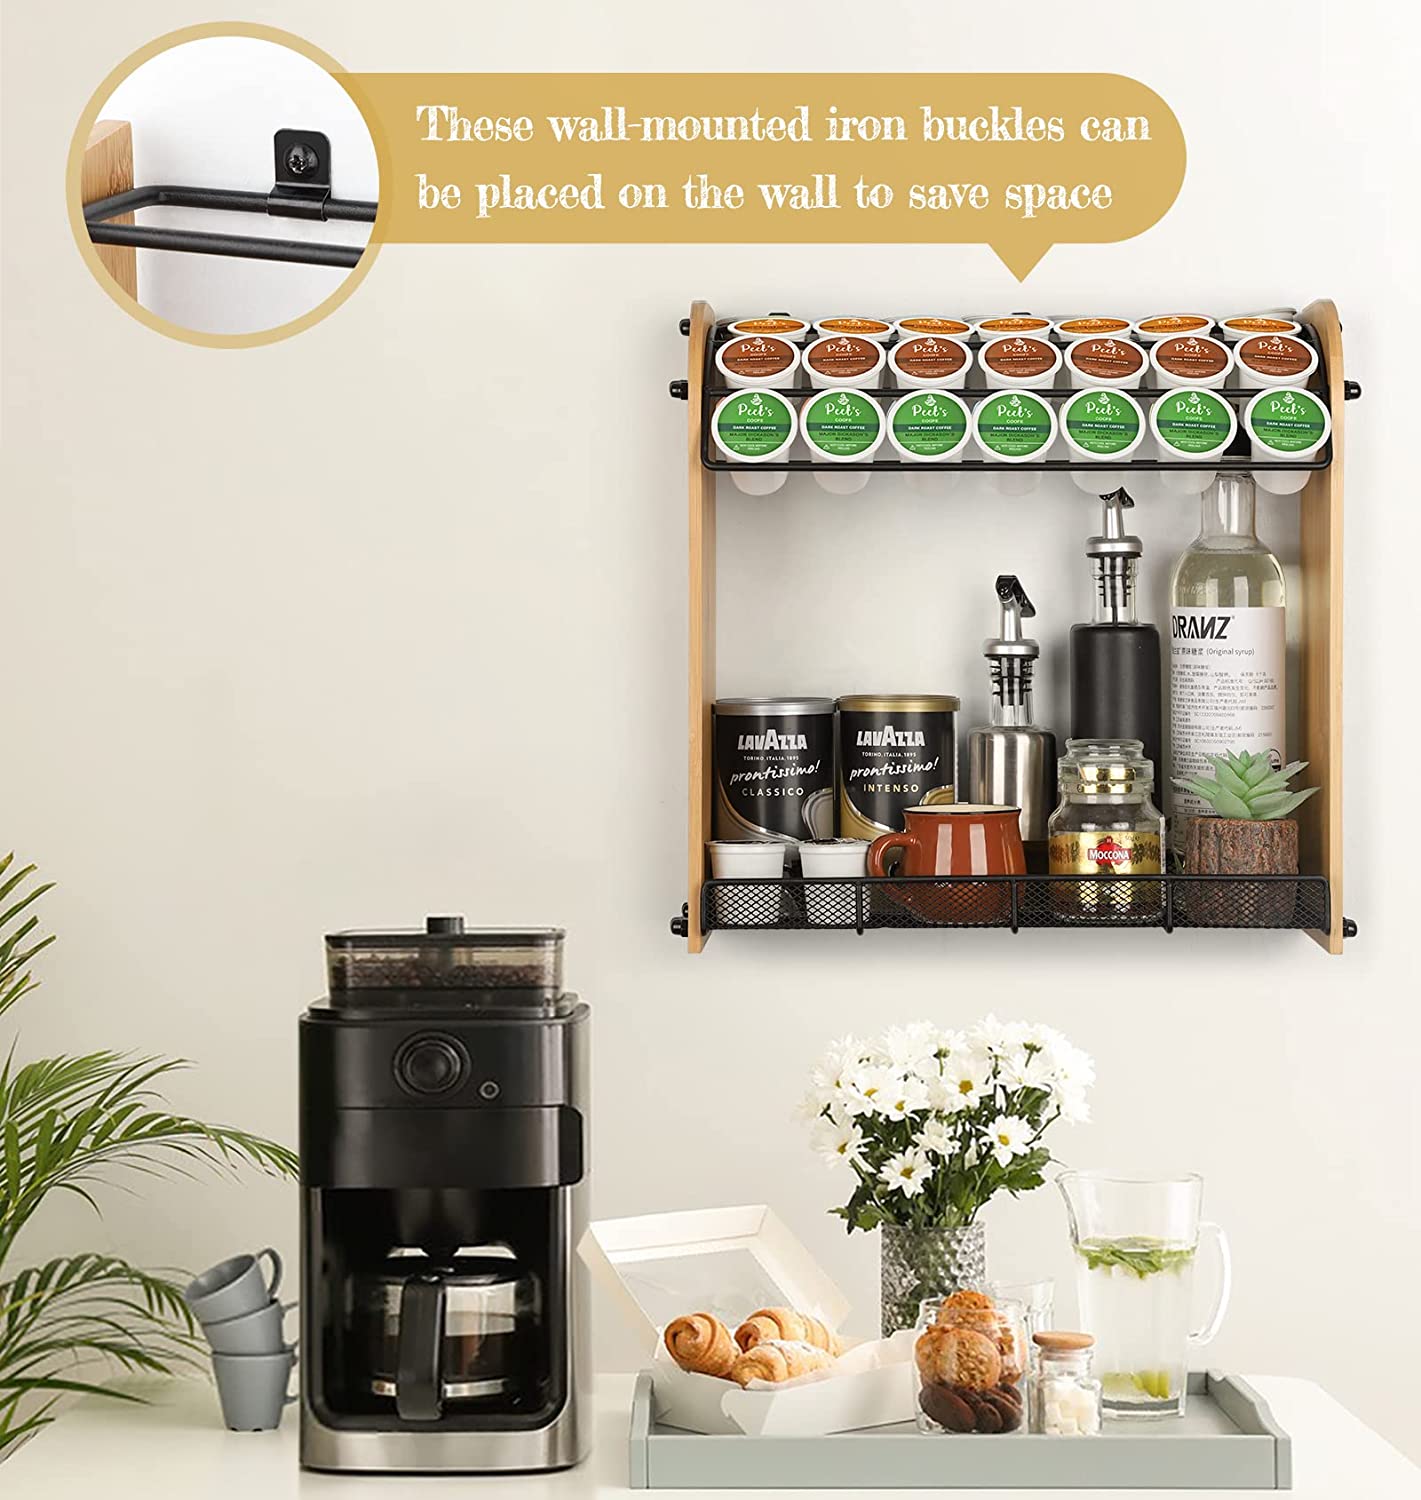 K Cup Holder Large Capacity Coffee Pod Holder Coffee Bar Accessories and Cup Storage Organizer Save Space for Home Office Kitchen Counter Organizer(at Least 49 Coffee Pods)